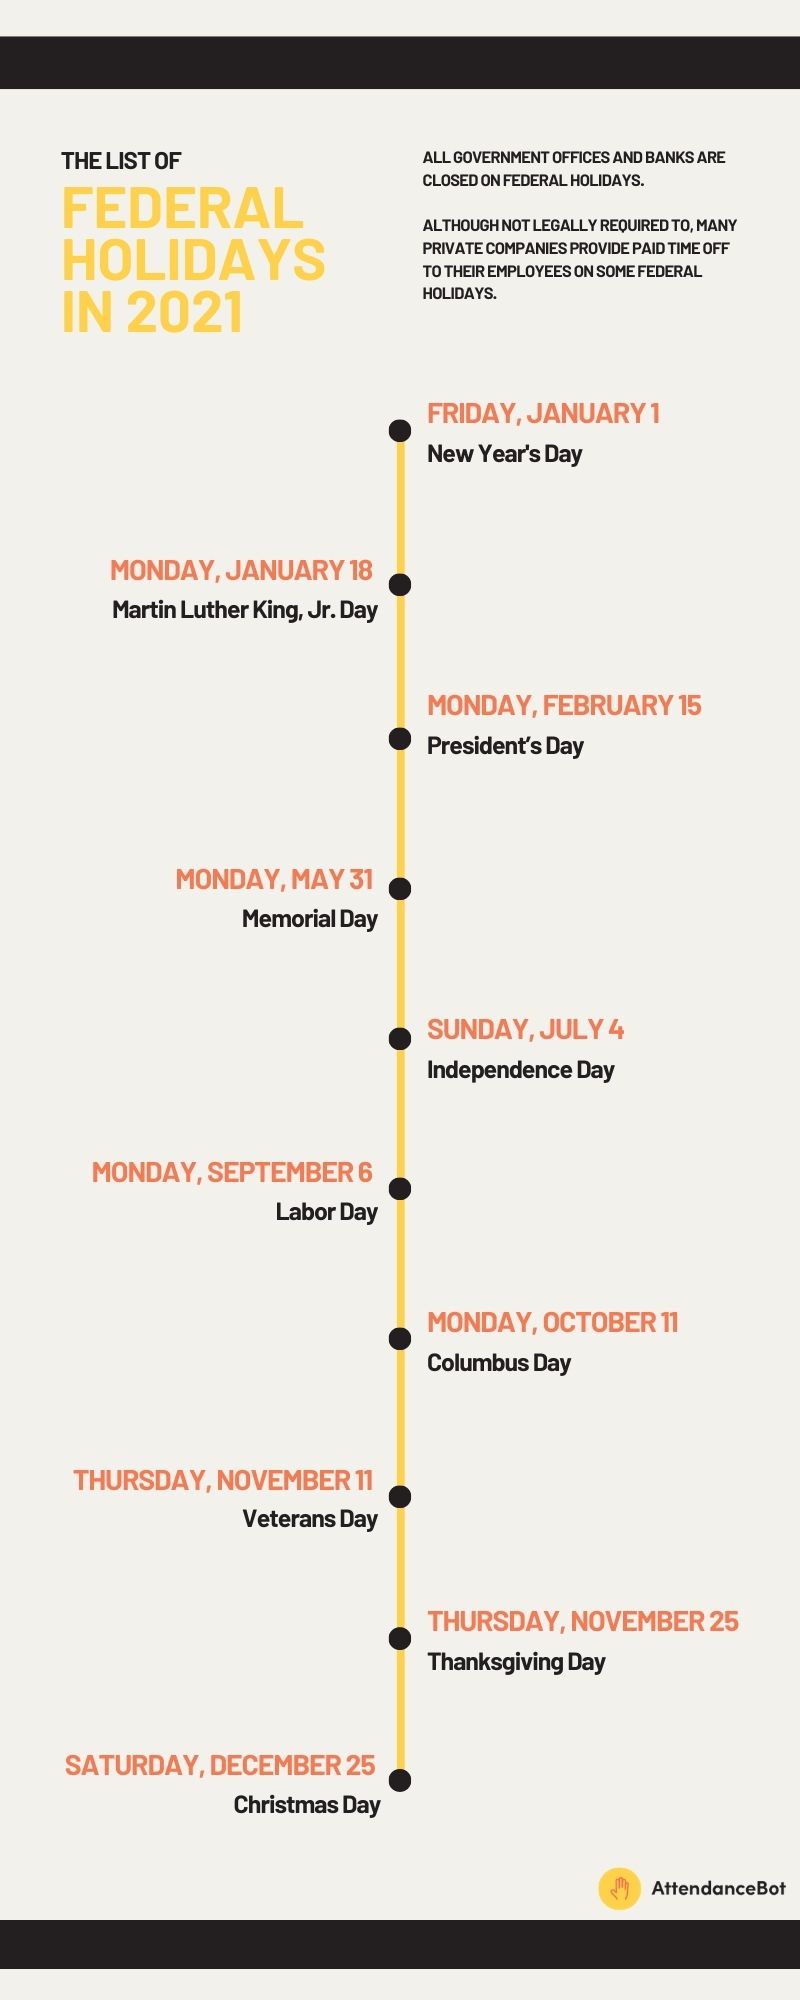 The List of Federal Holidays in 2021 for Businesses Infographic